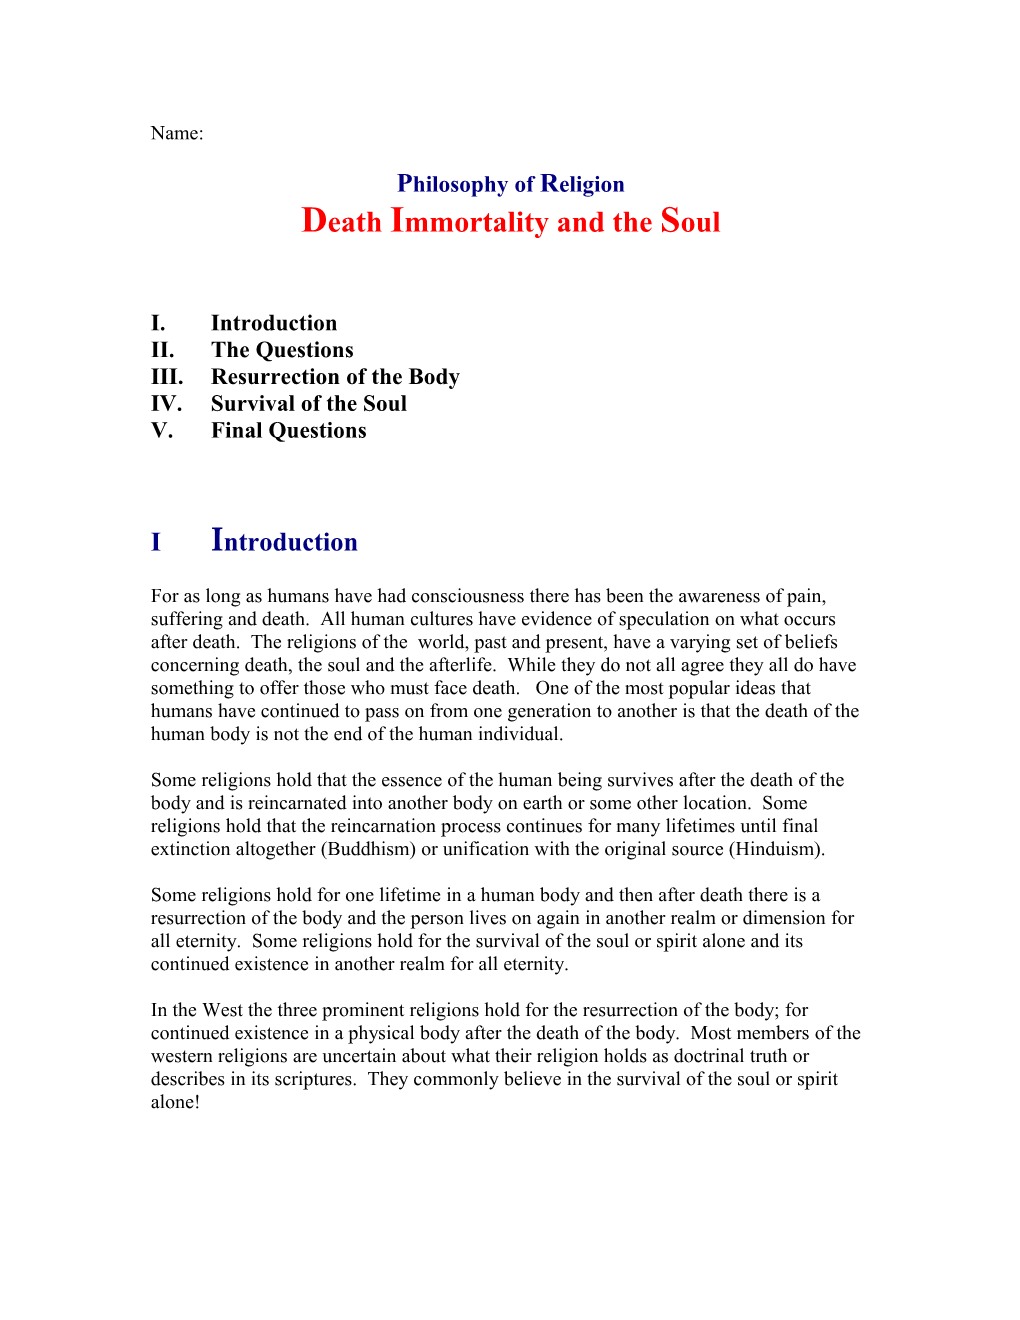 Death Immortality and the Soul